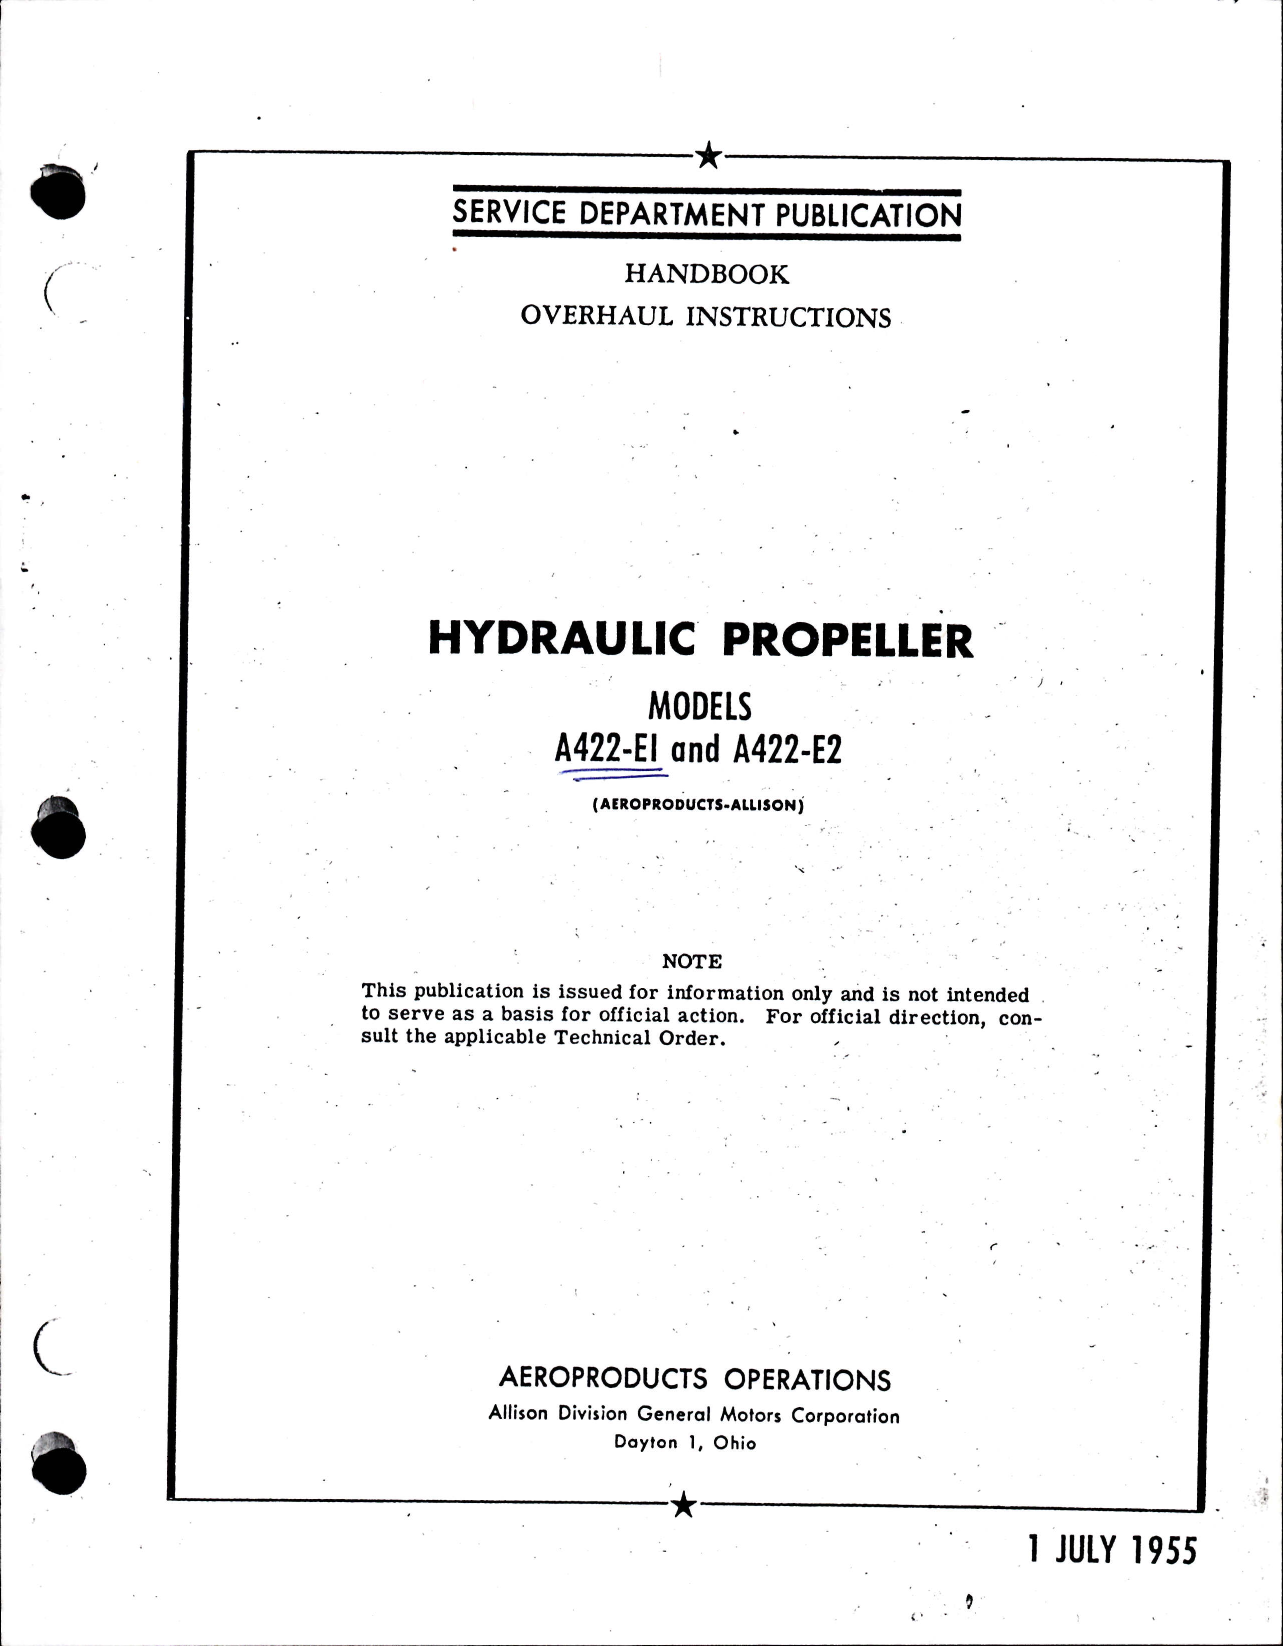 Sample page 1 from AirCorps Library document: Overhaul Instructions for Hydraulic Propeller Models A422-E1 and A422-E2